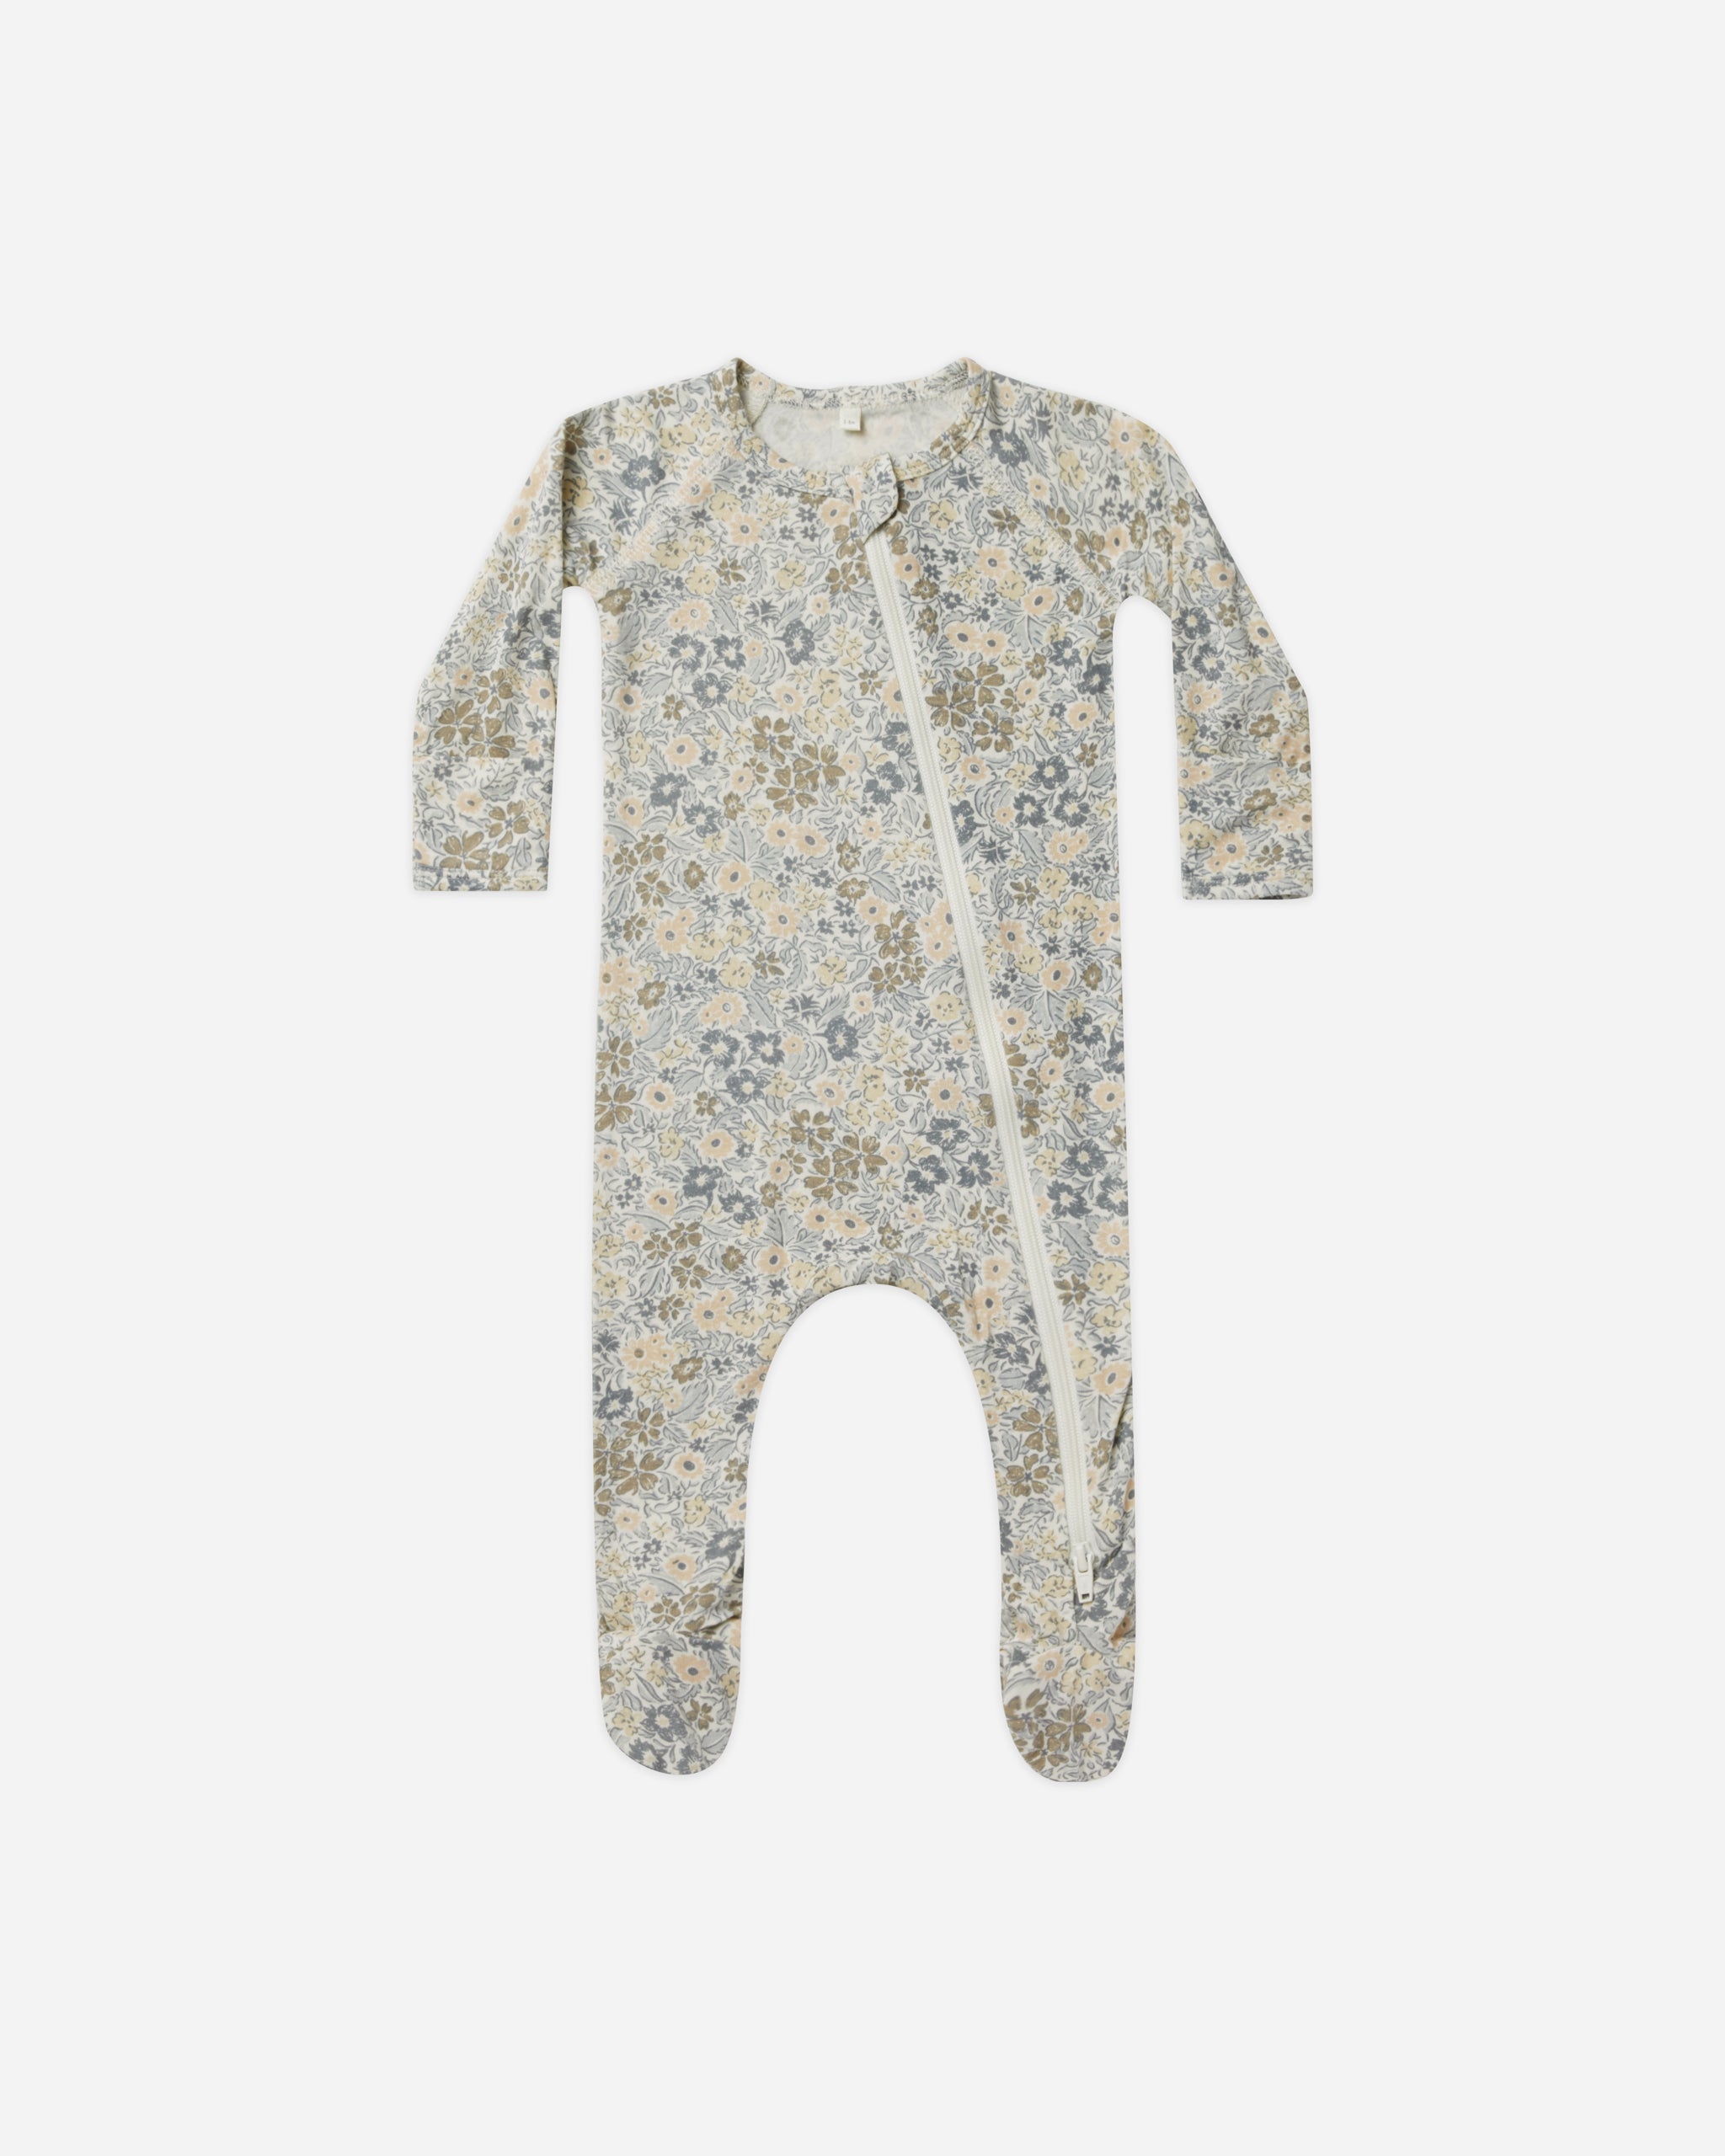 Bamboo Zip Footie || Winter Garden - Rylee + Cru | Kids Clothes | Trendy Baby Clothes | Modern Infant Outfits |